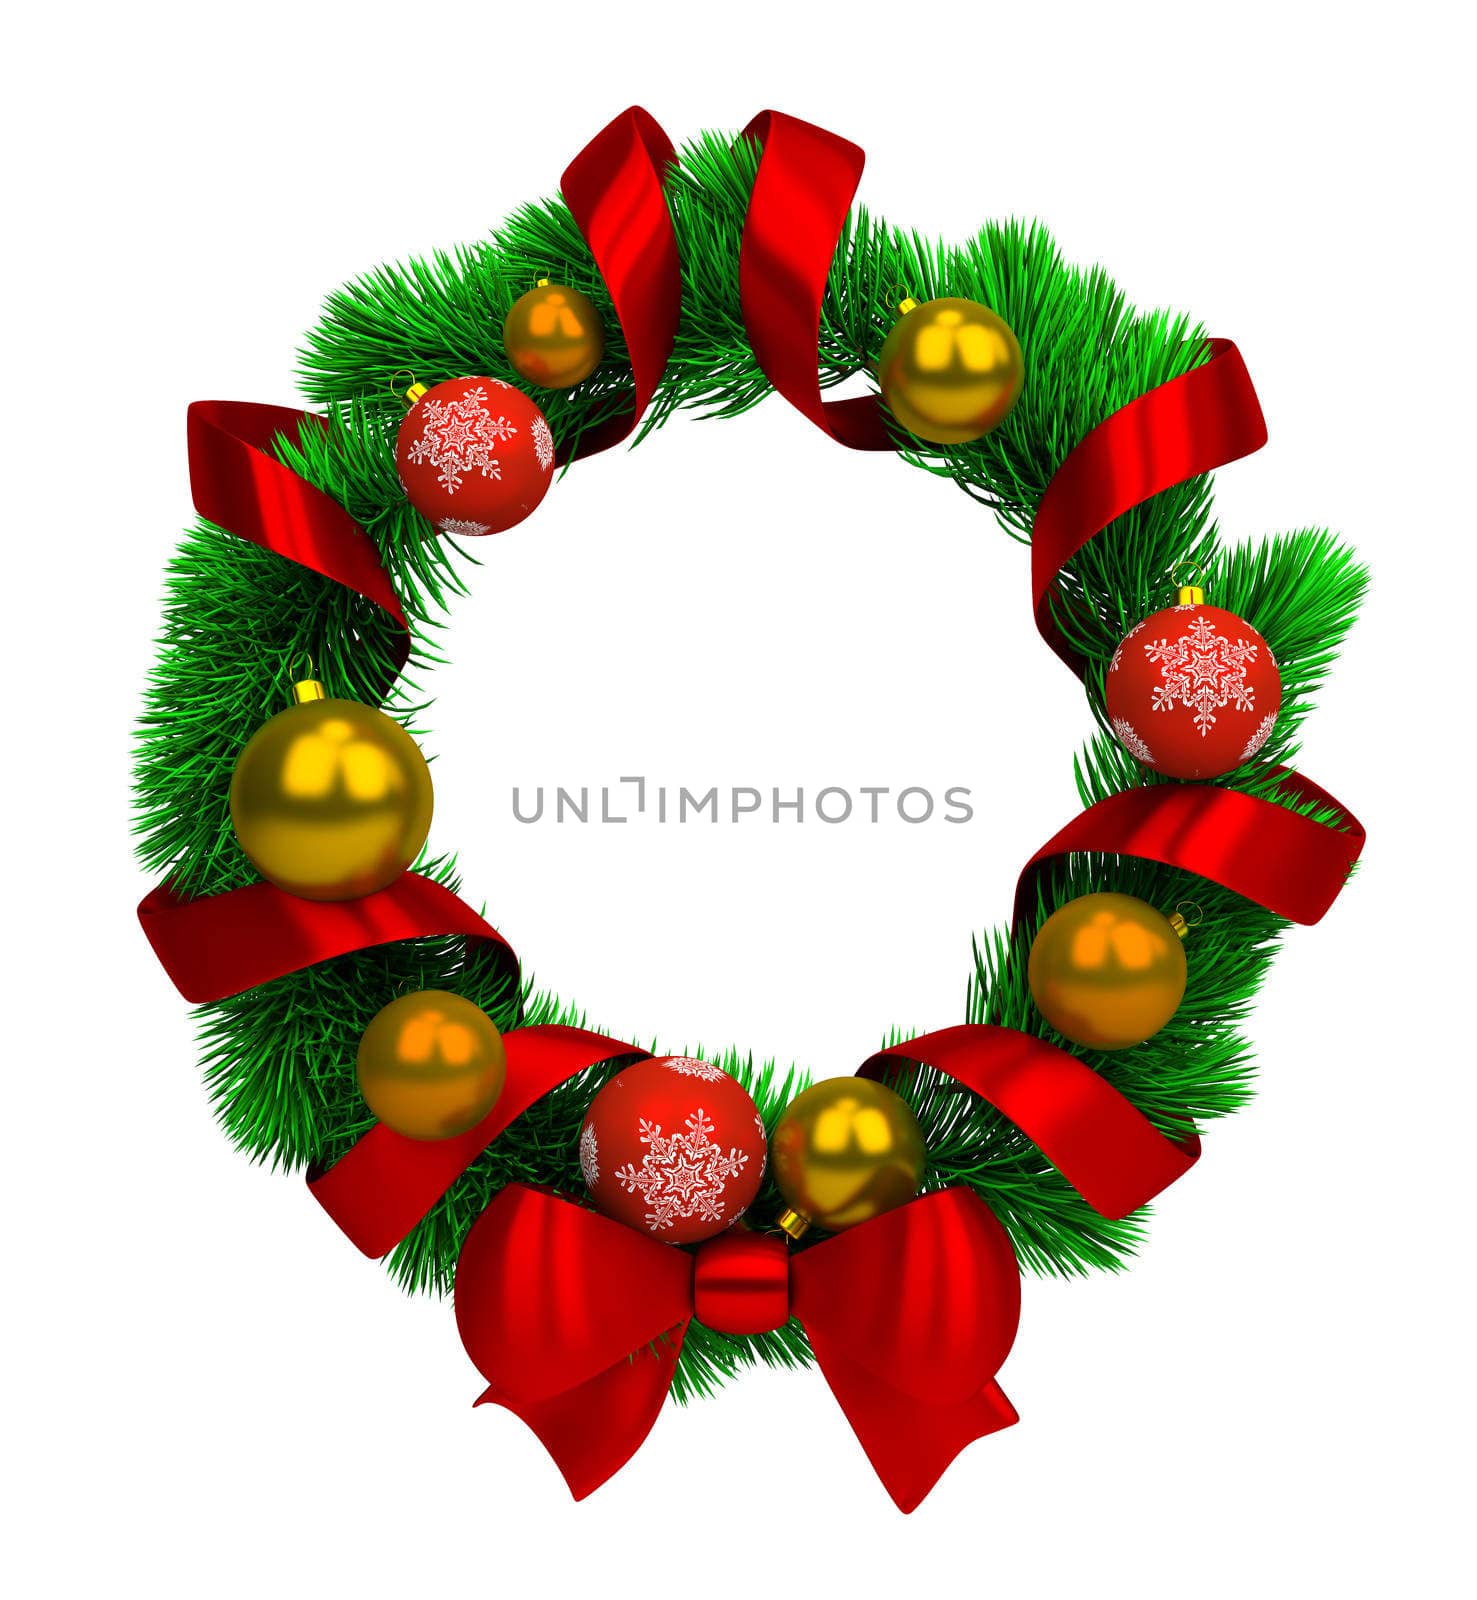 Christmas wreath by Anatoly